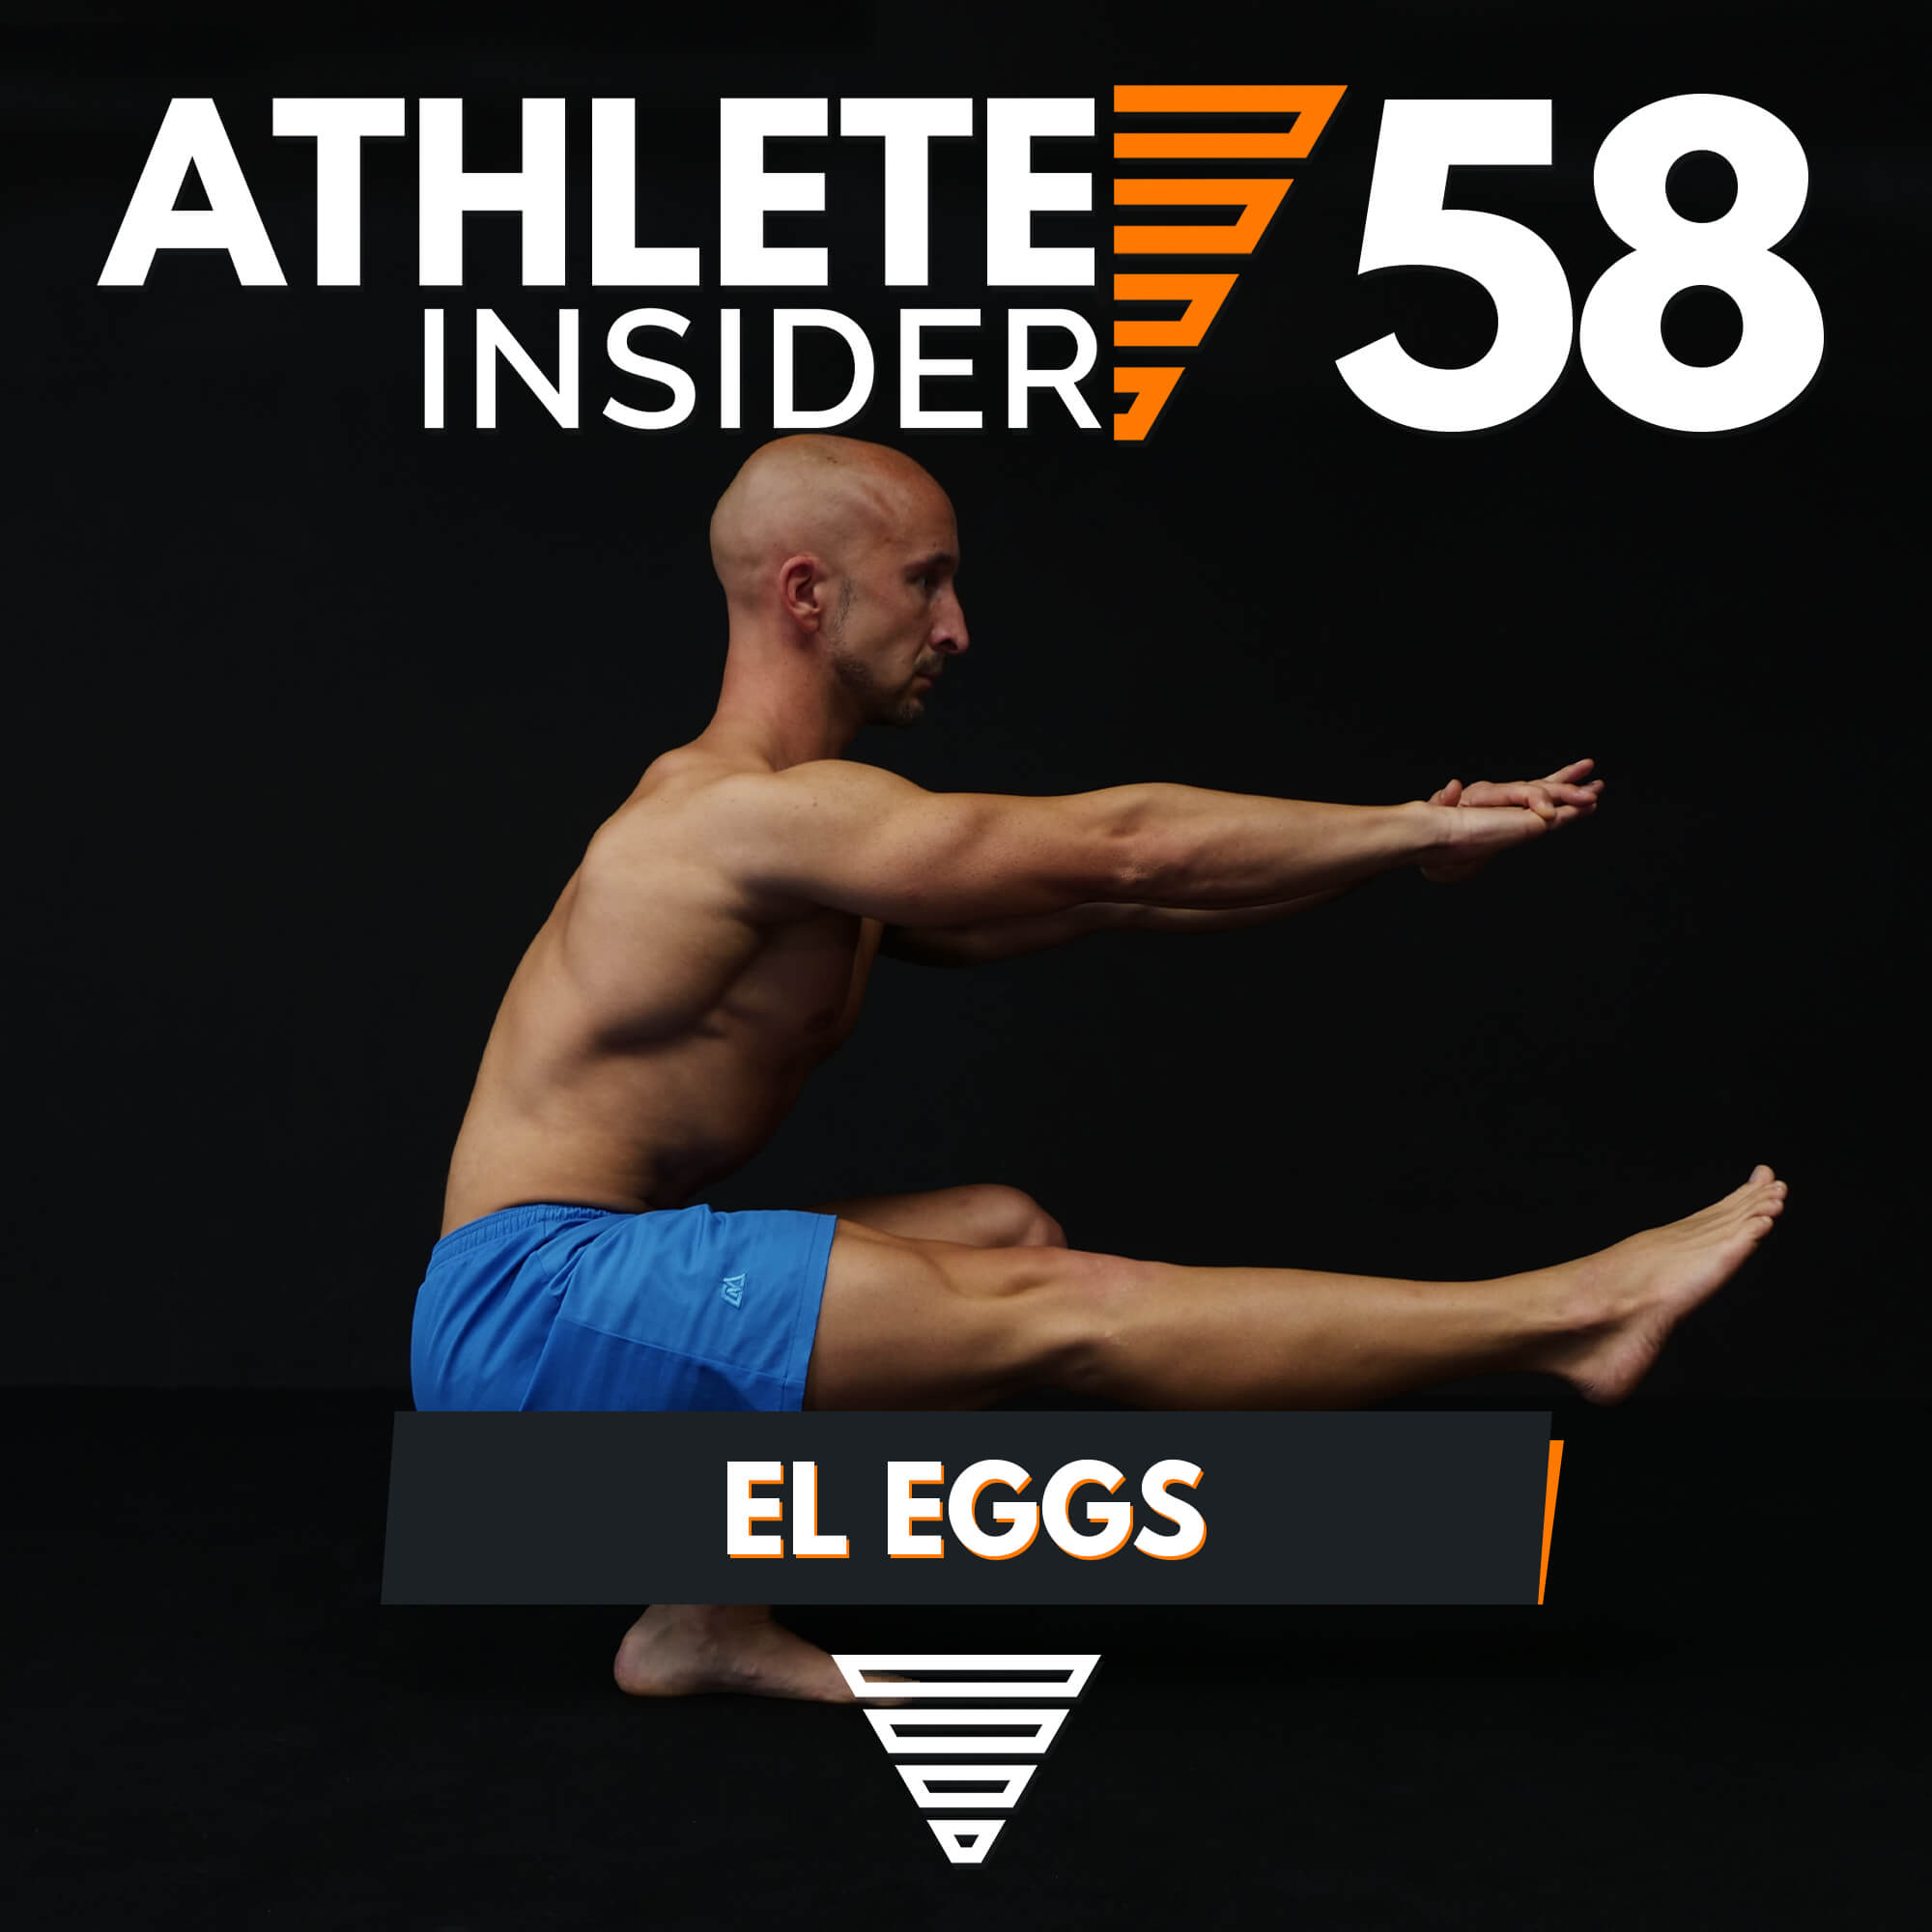 THE MAN IN THE BLUE SHORTS | Interview with El Eggs from Cali Move | Athlete Insider Podcast #58